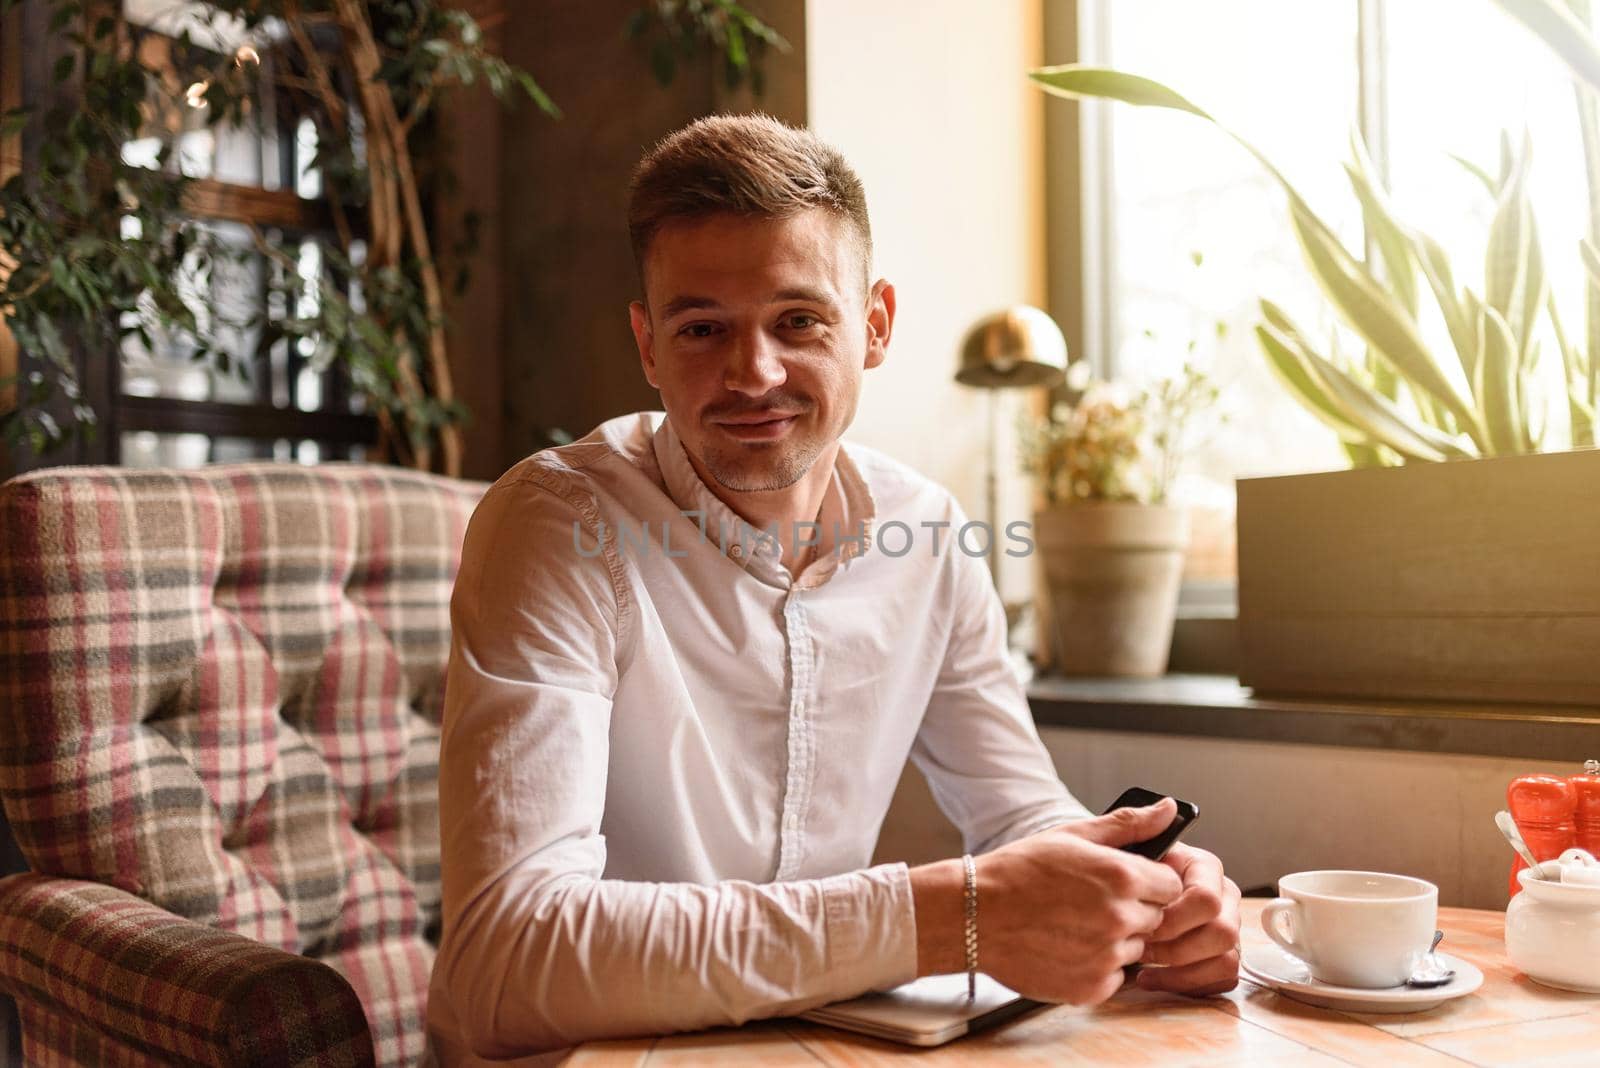 Waist up of smiling handsome guy wearing white shirt while sitting in cafe and having coffee. Lifestyle concept